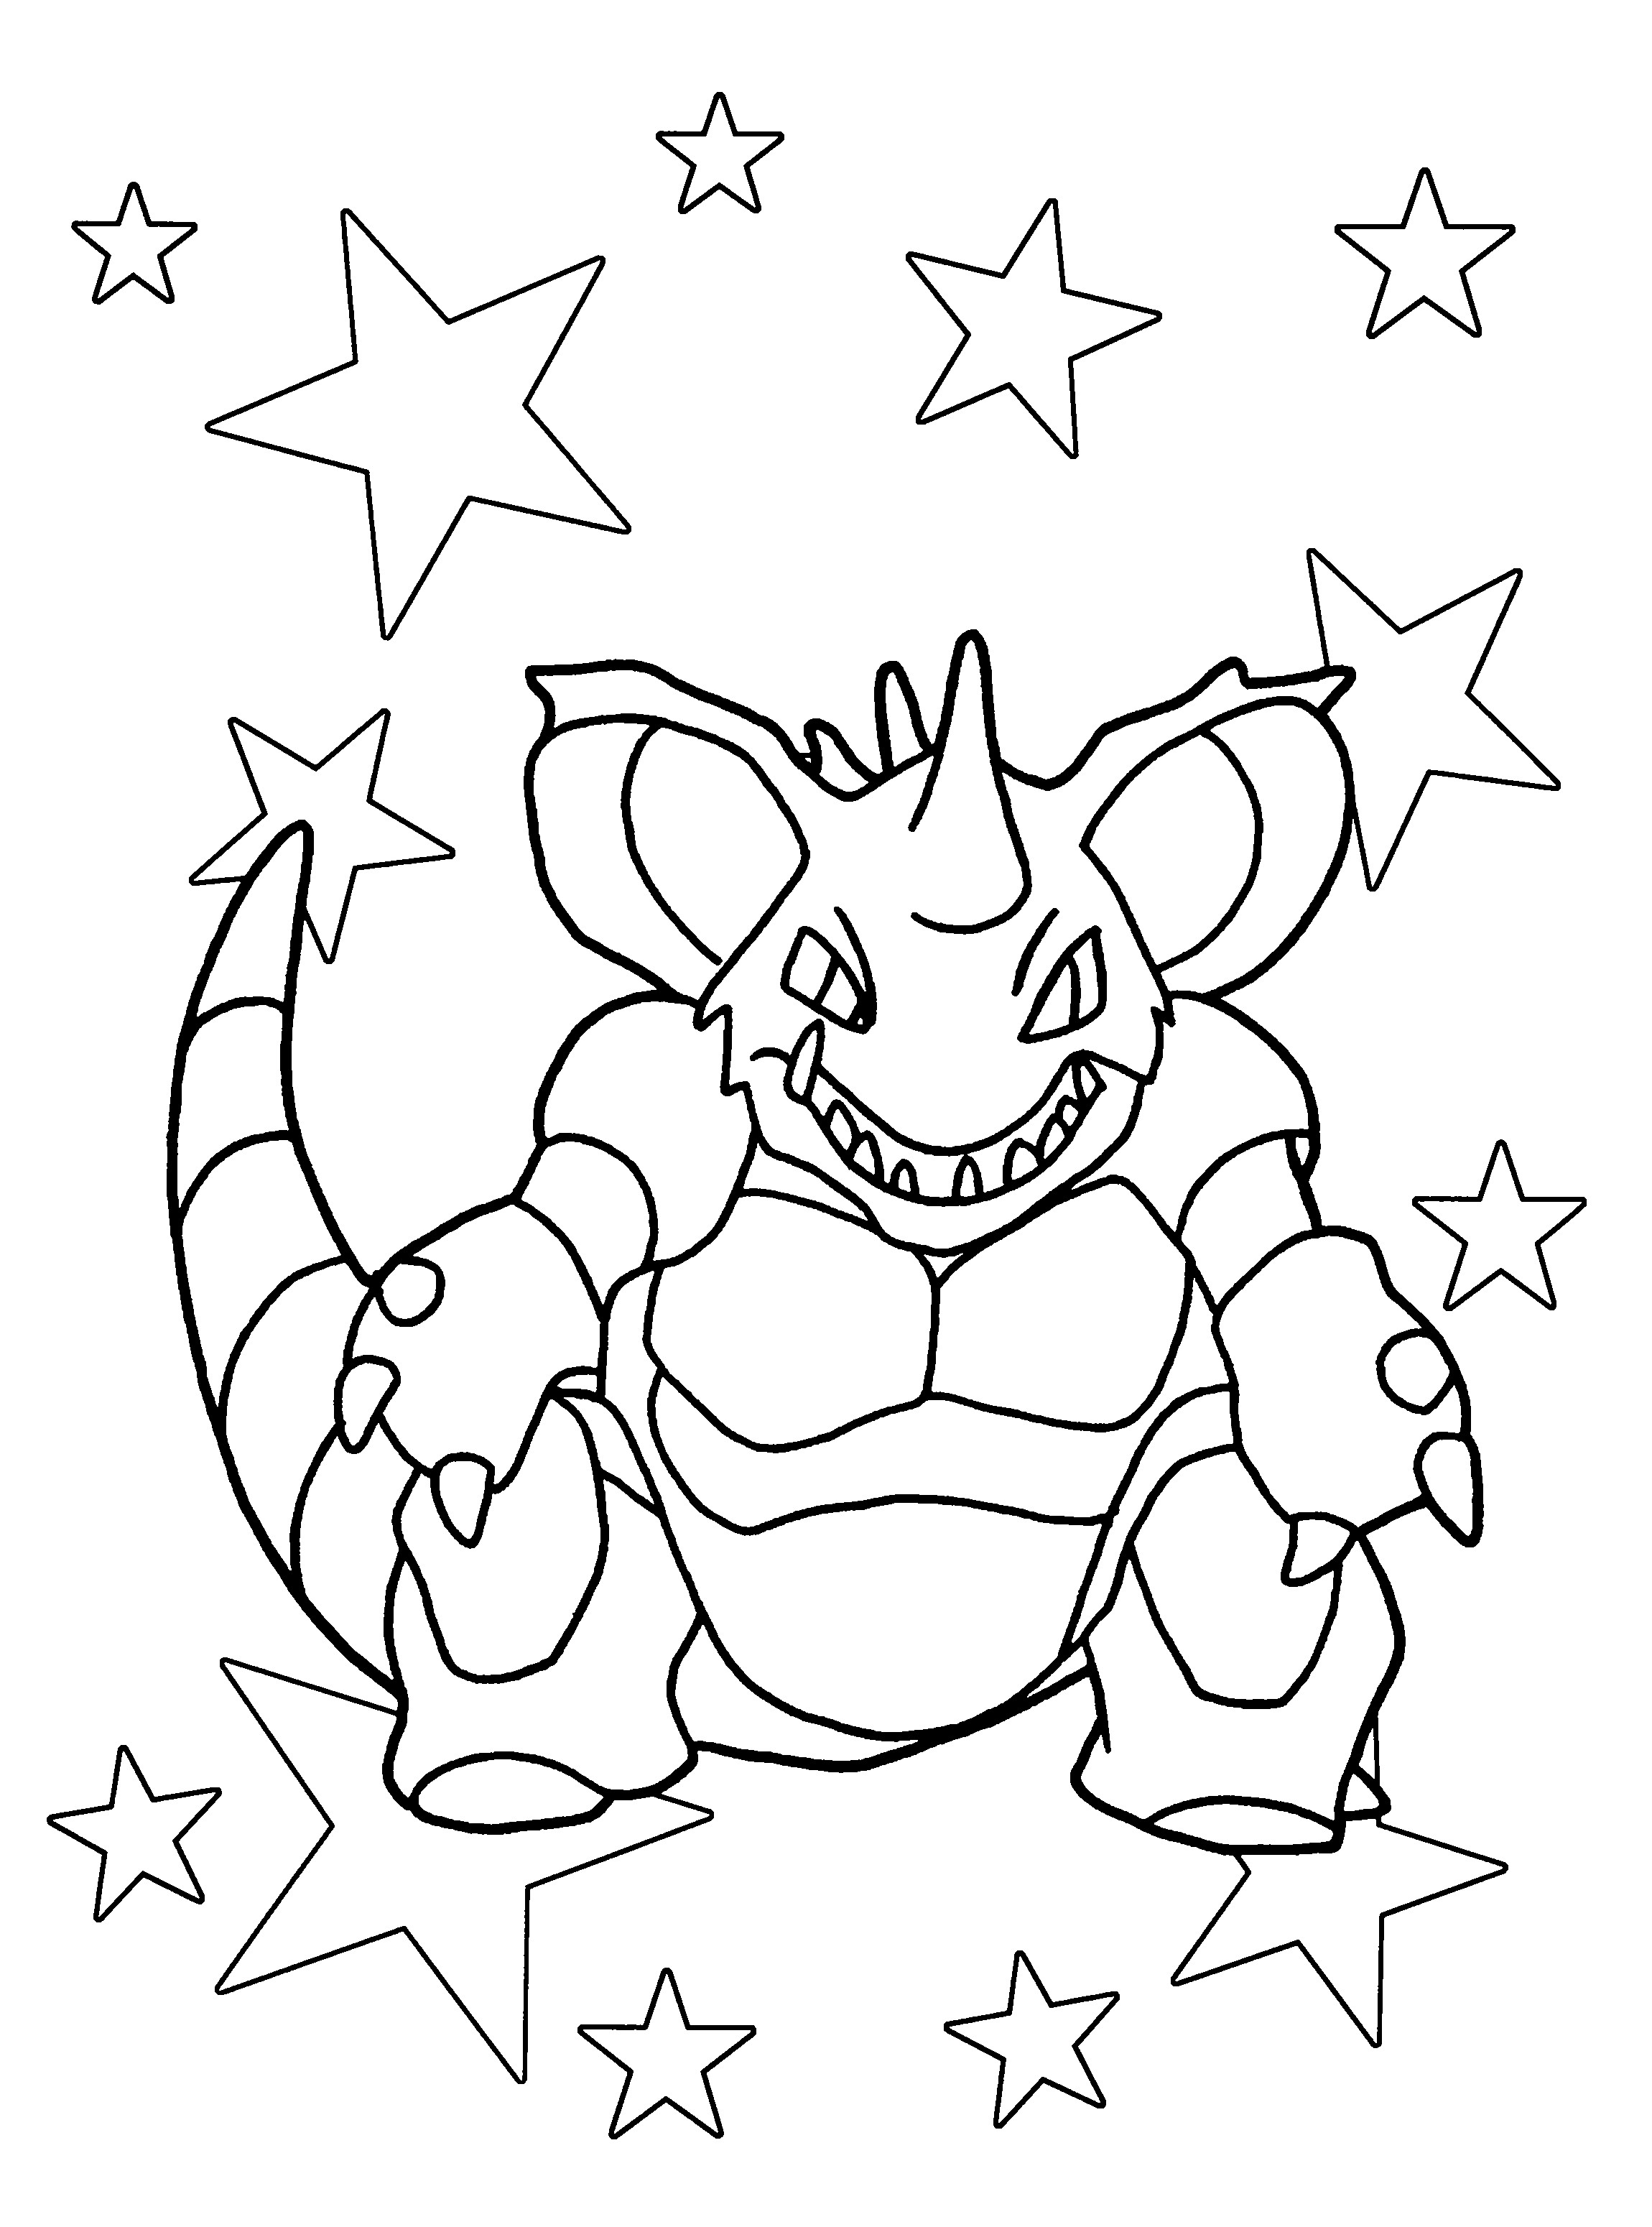 Pokemon Cards Coloring Pages Search Results for "Blank Card Coloring P...